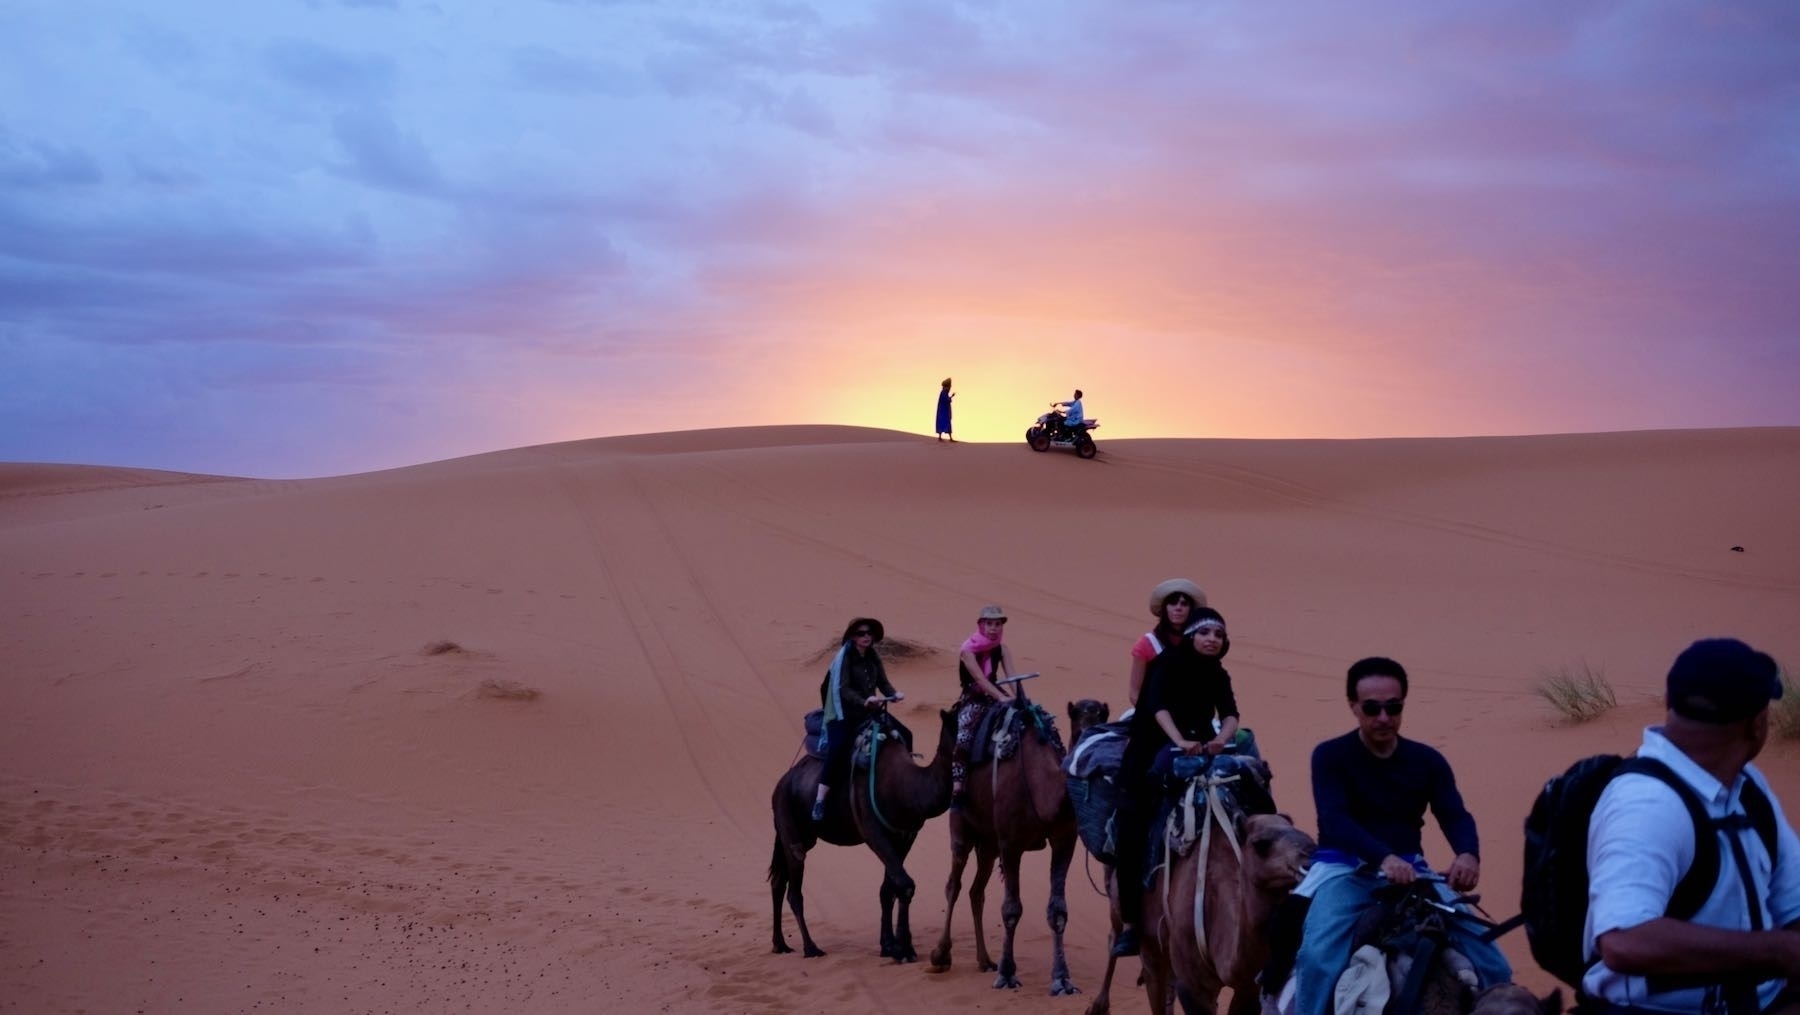 Sunrise in the desert with camel train. 